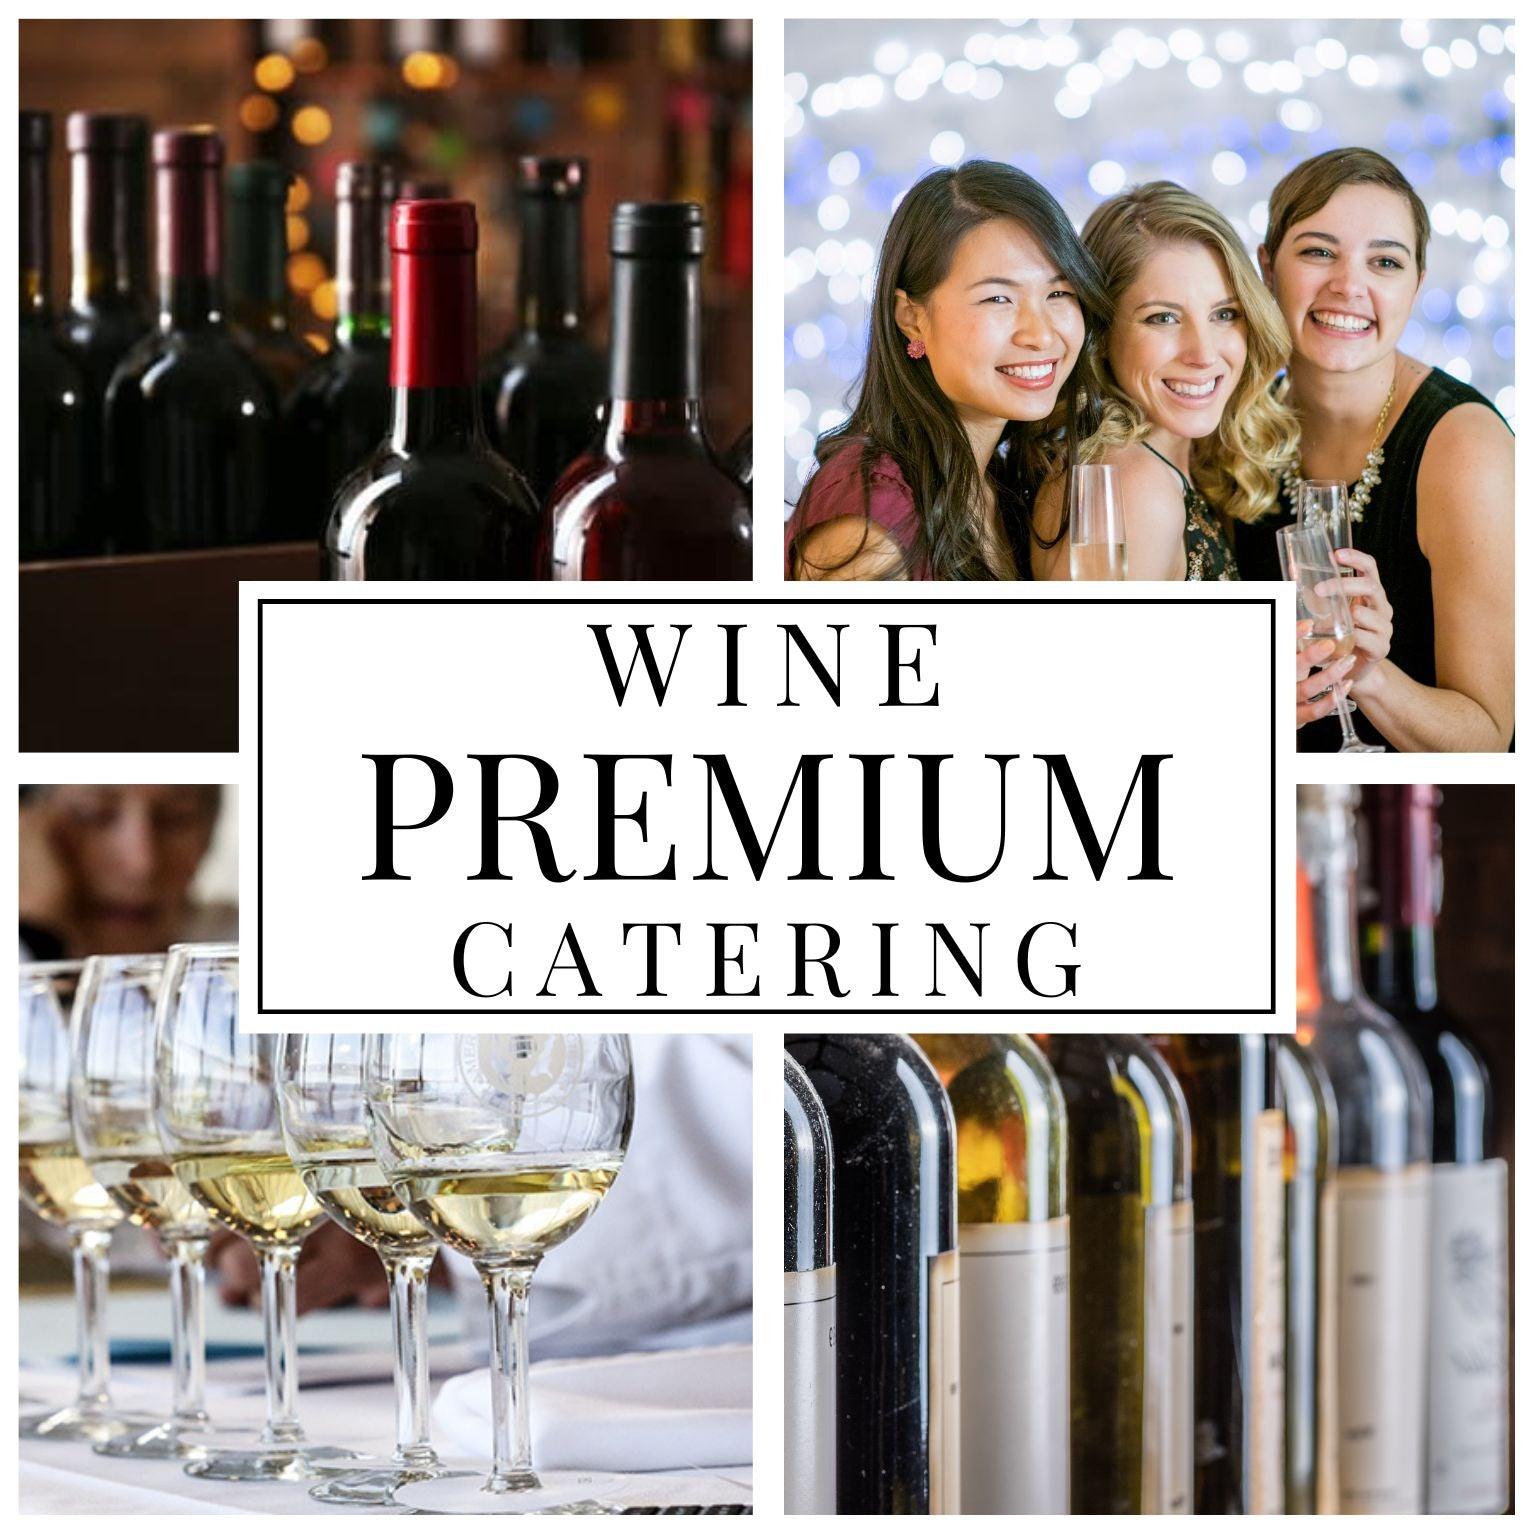 Premium wine catering from Pop Up Wine in Singapore